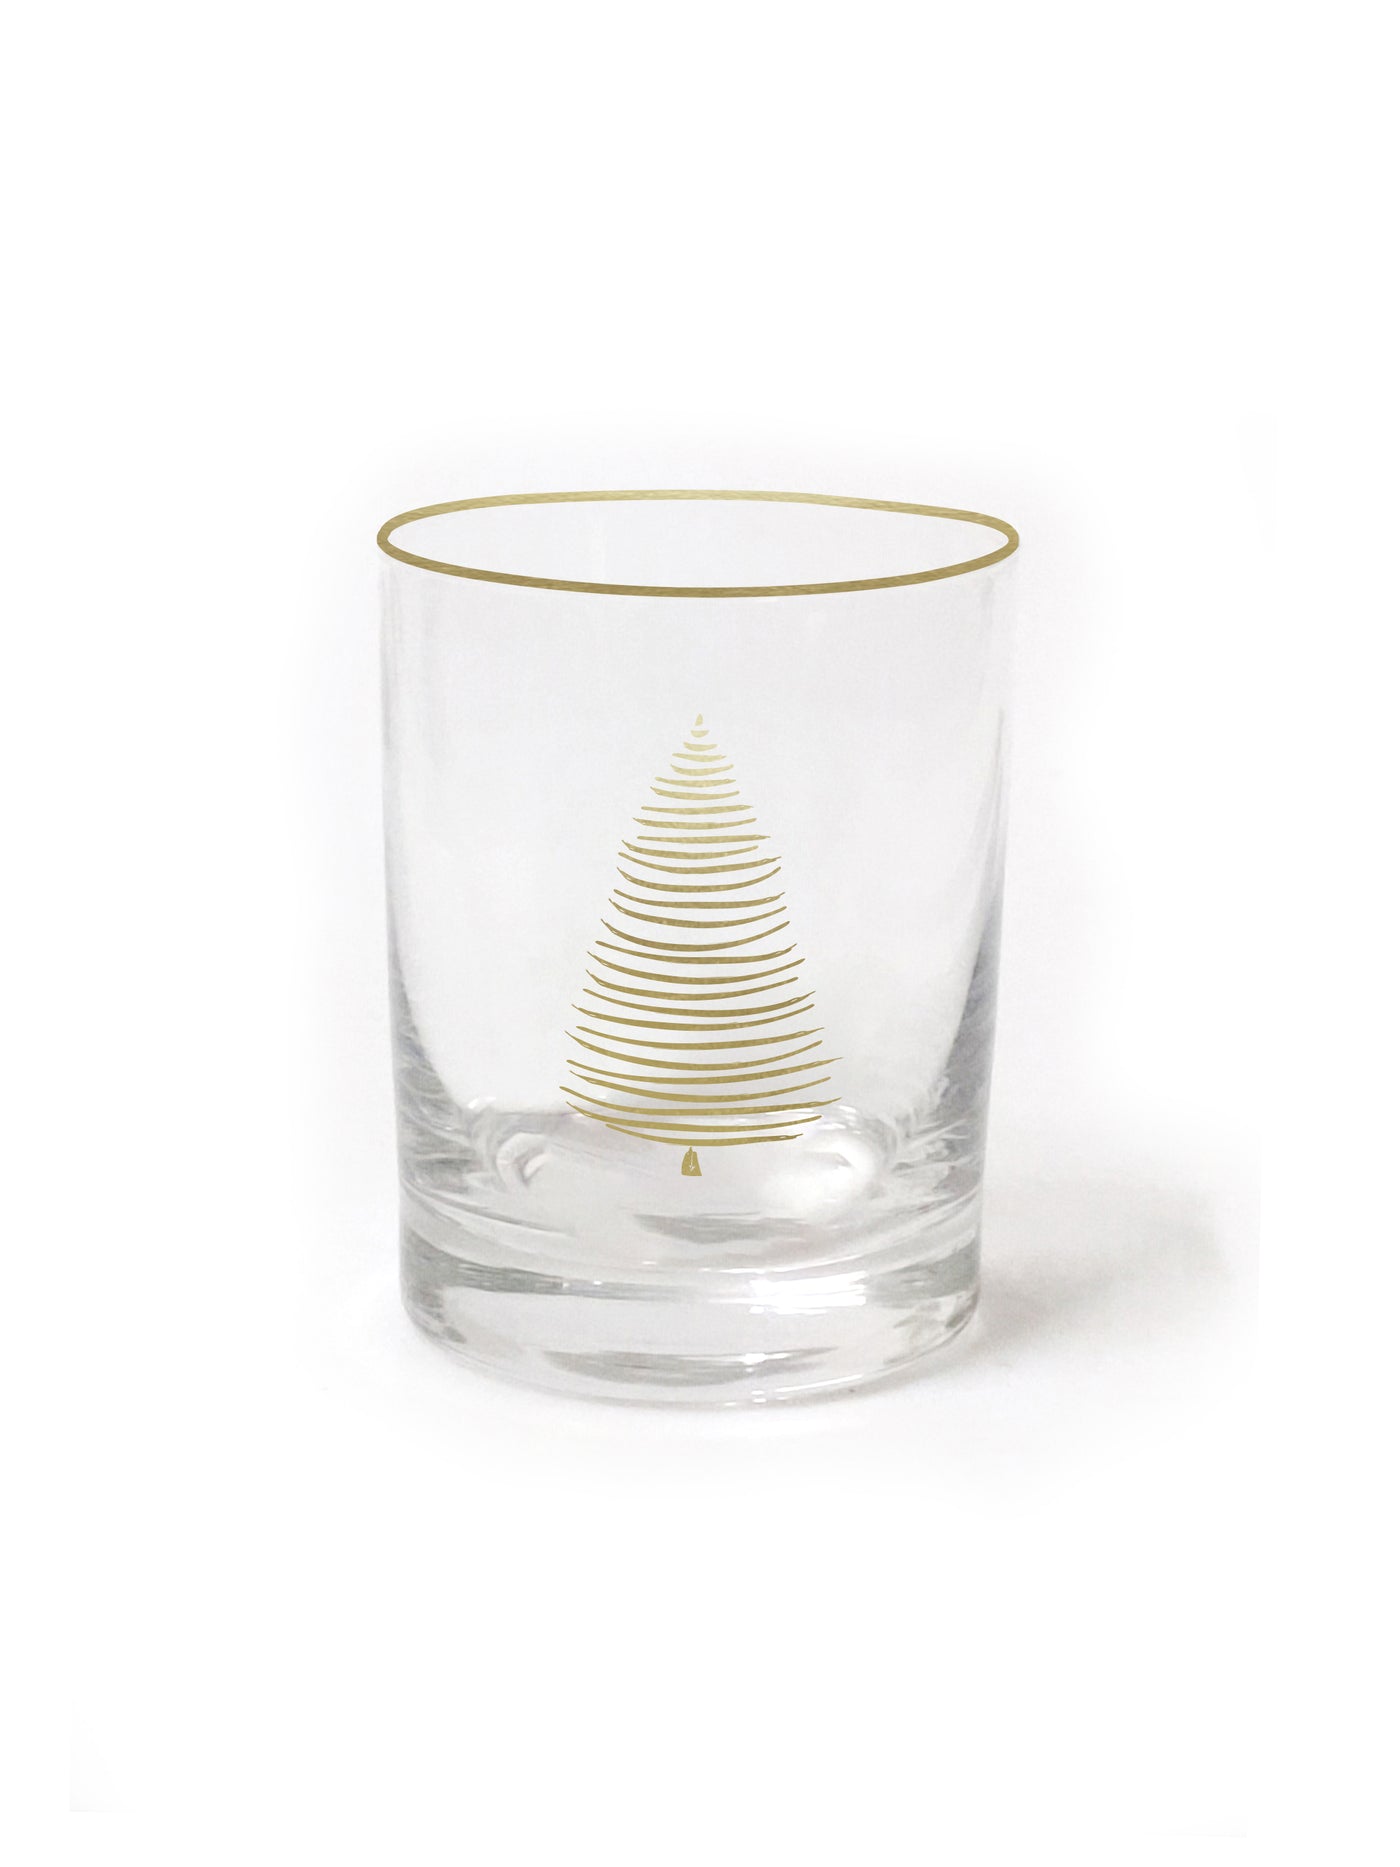 Cocktail Glass | Gold Swirl Christmas Tree - Set of 4